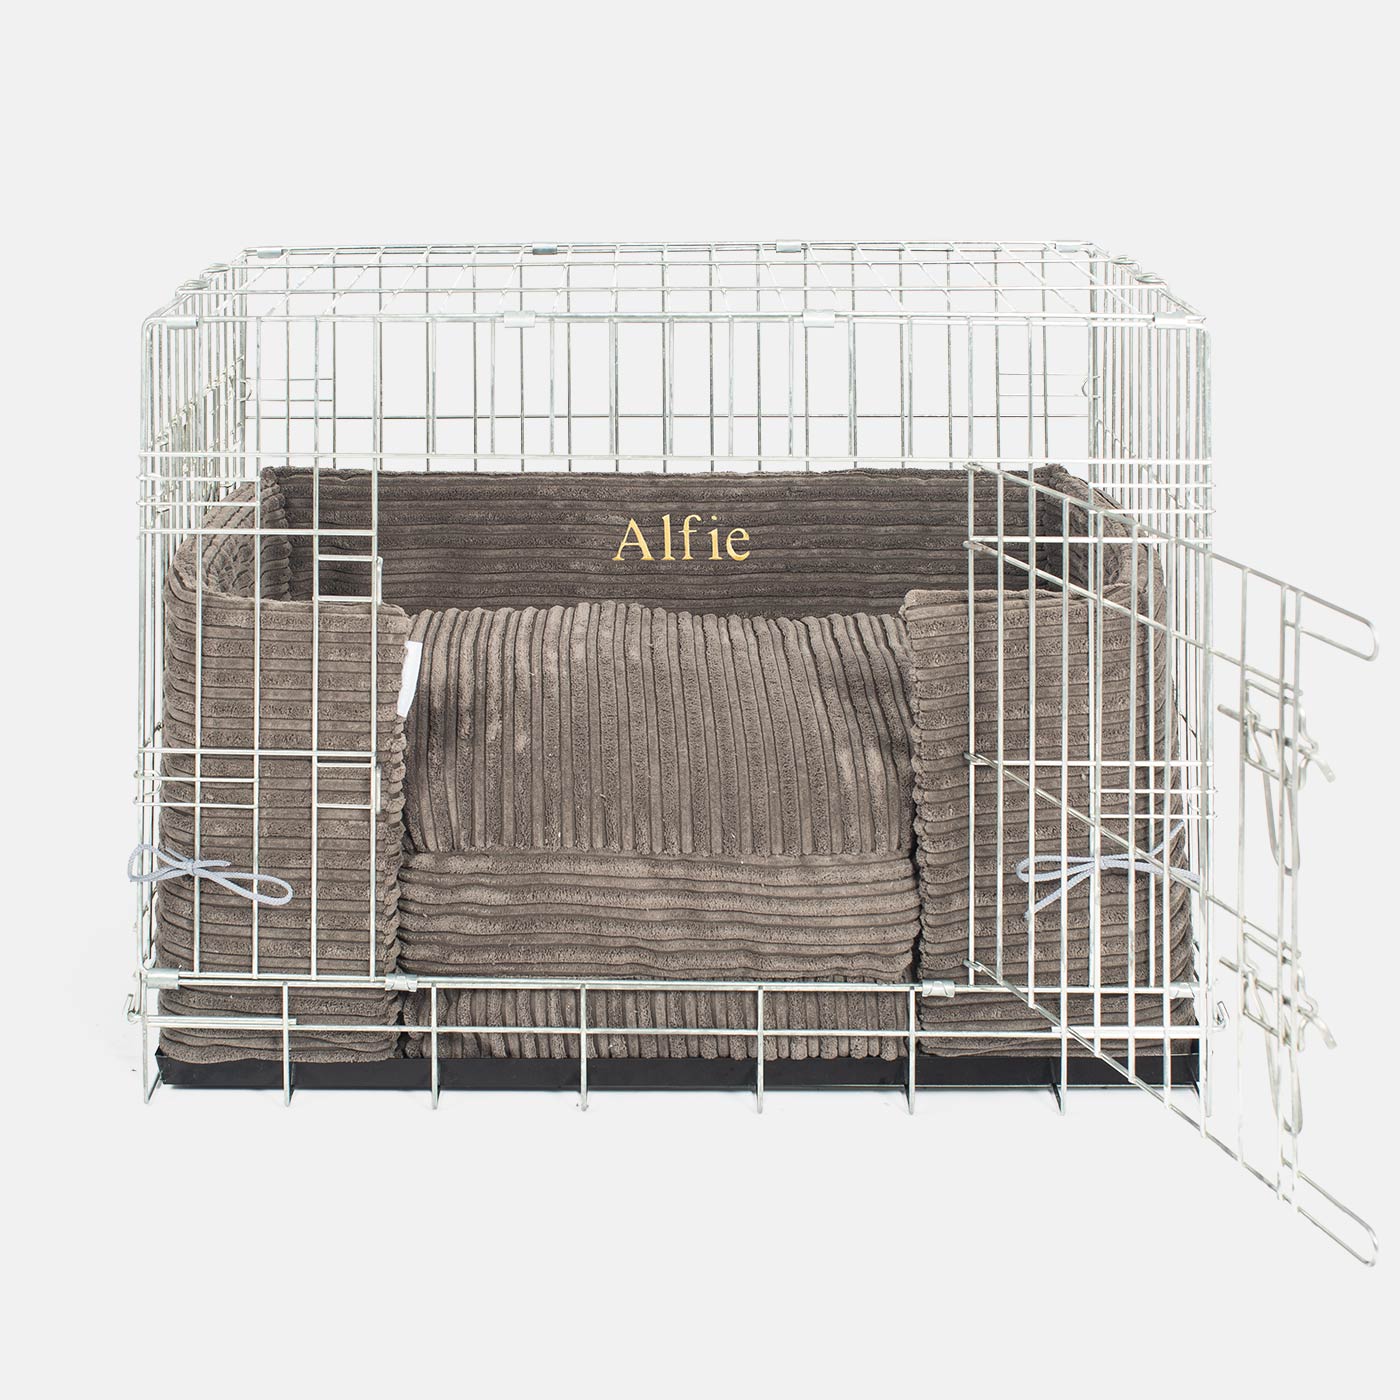 Luxury Dog Crate Bumper, Essentials Plush Crate Bumper in Dark Grey The Perfect Dog Crate Accessory, Available To Personalise Now at Lords & Labradors